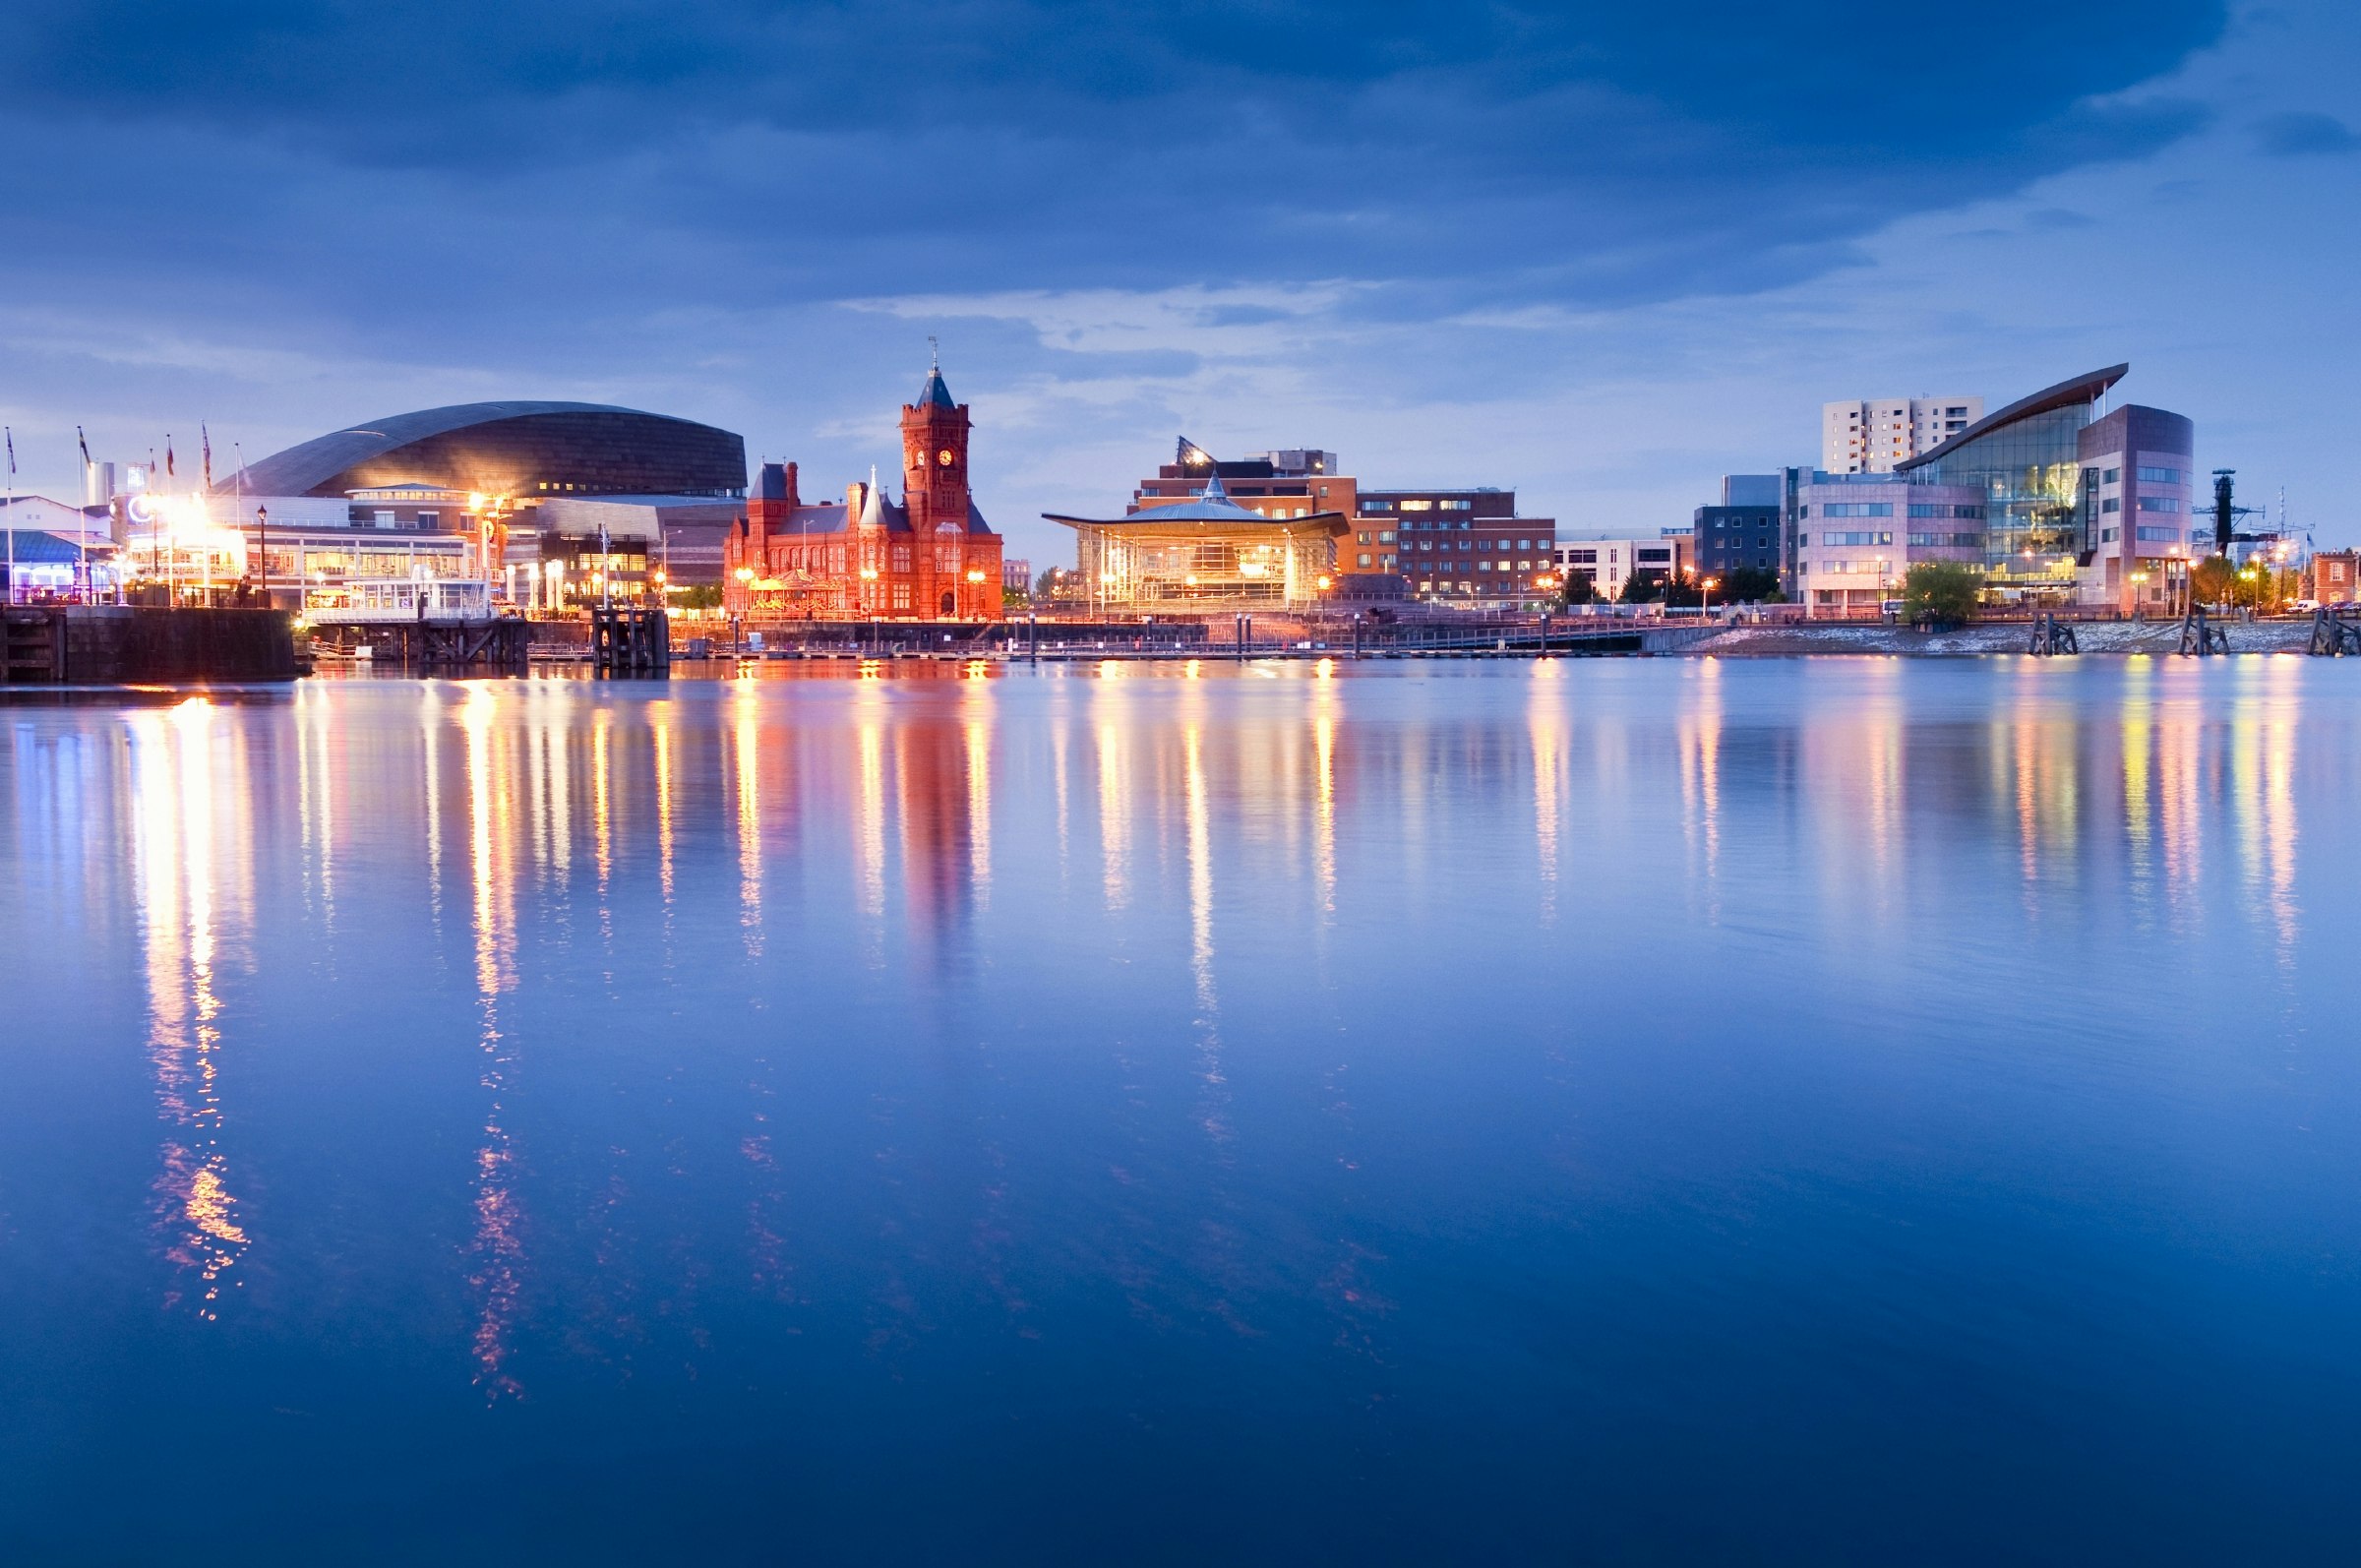 The buildings that line Cardiff Bay lit up against the night sky.